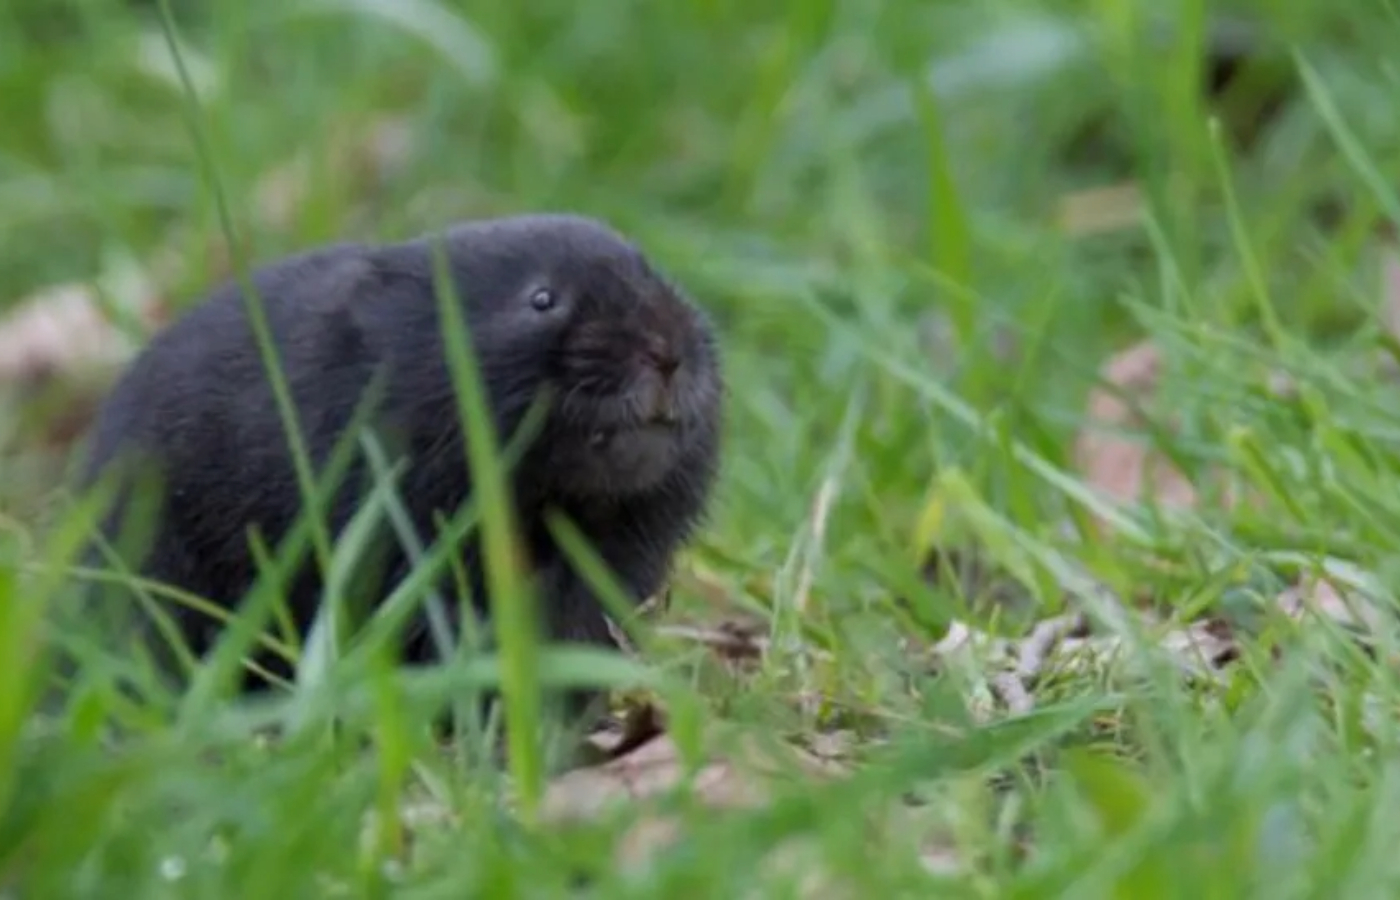  The charity are aiming to set up groups in Glasgow, Cardiff and London. Photo: Karen Miller/Mammal Society